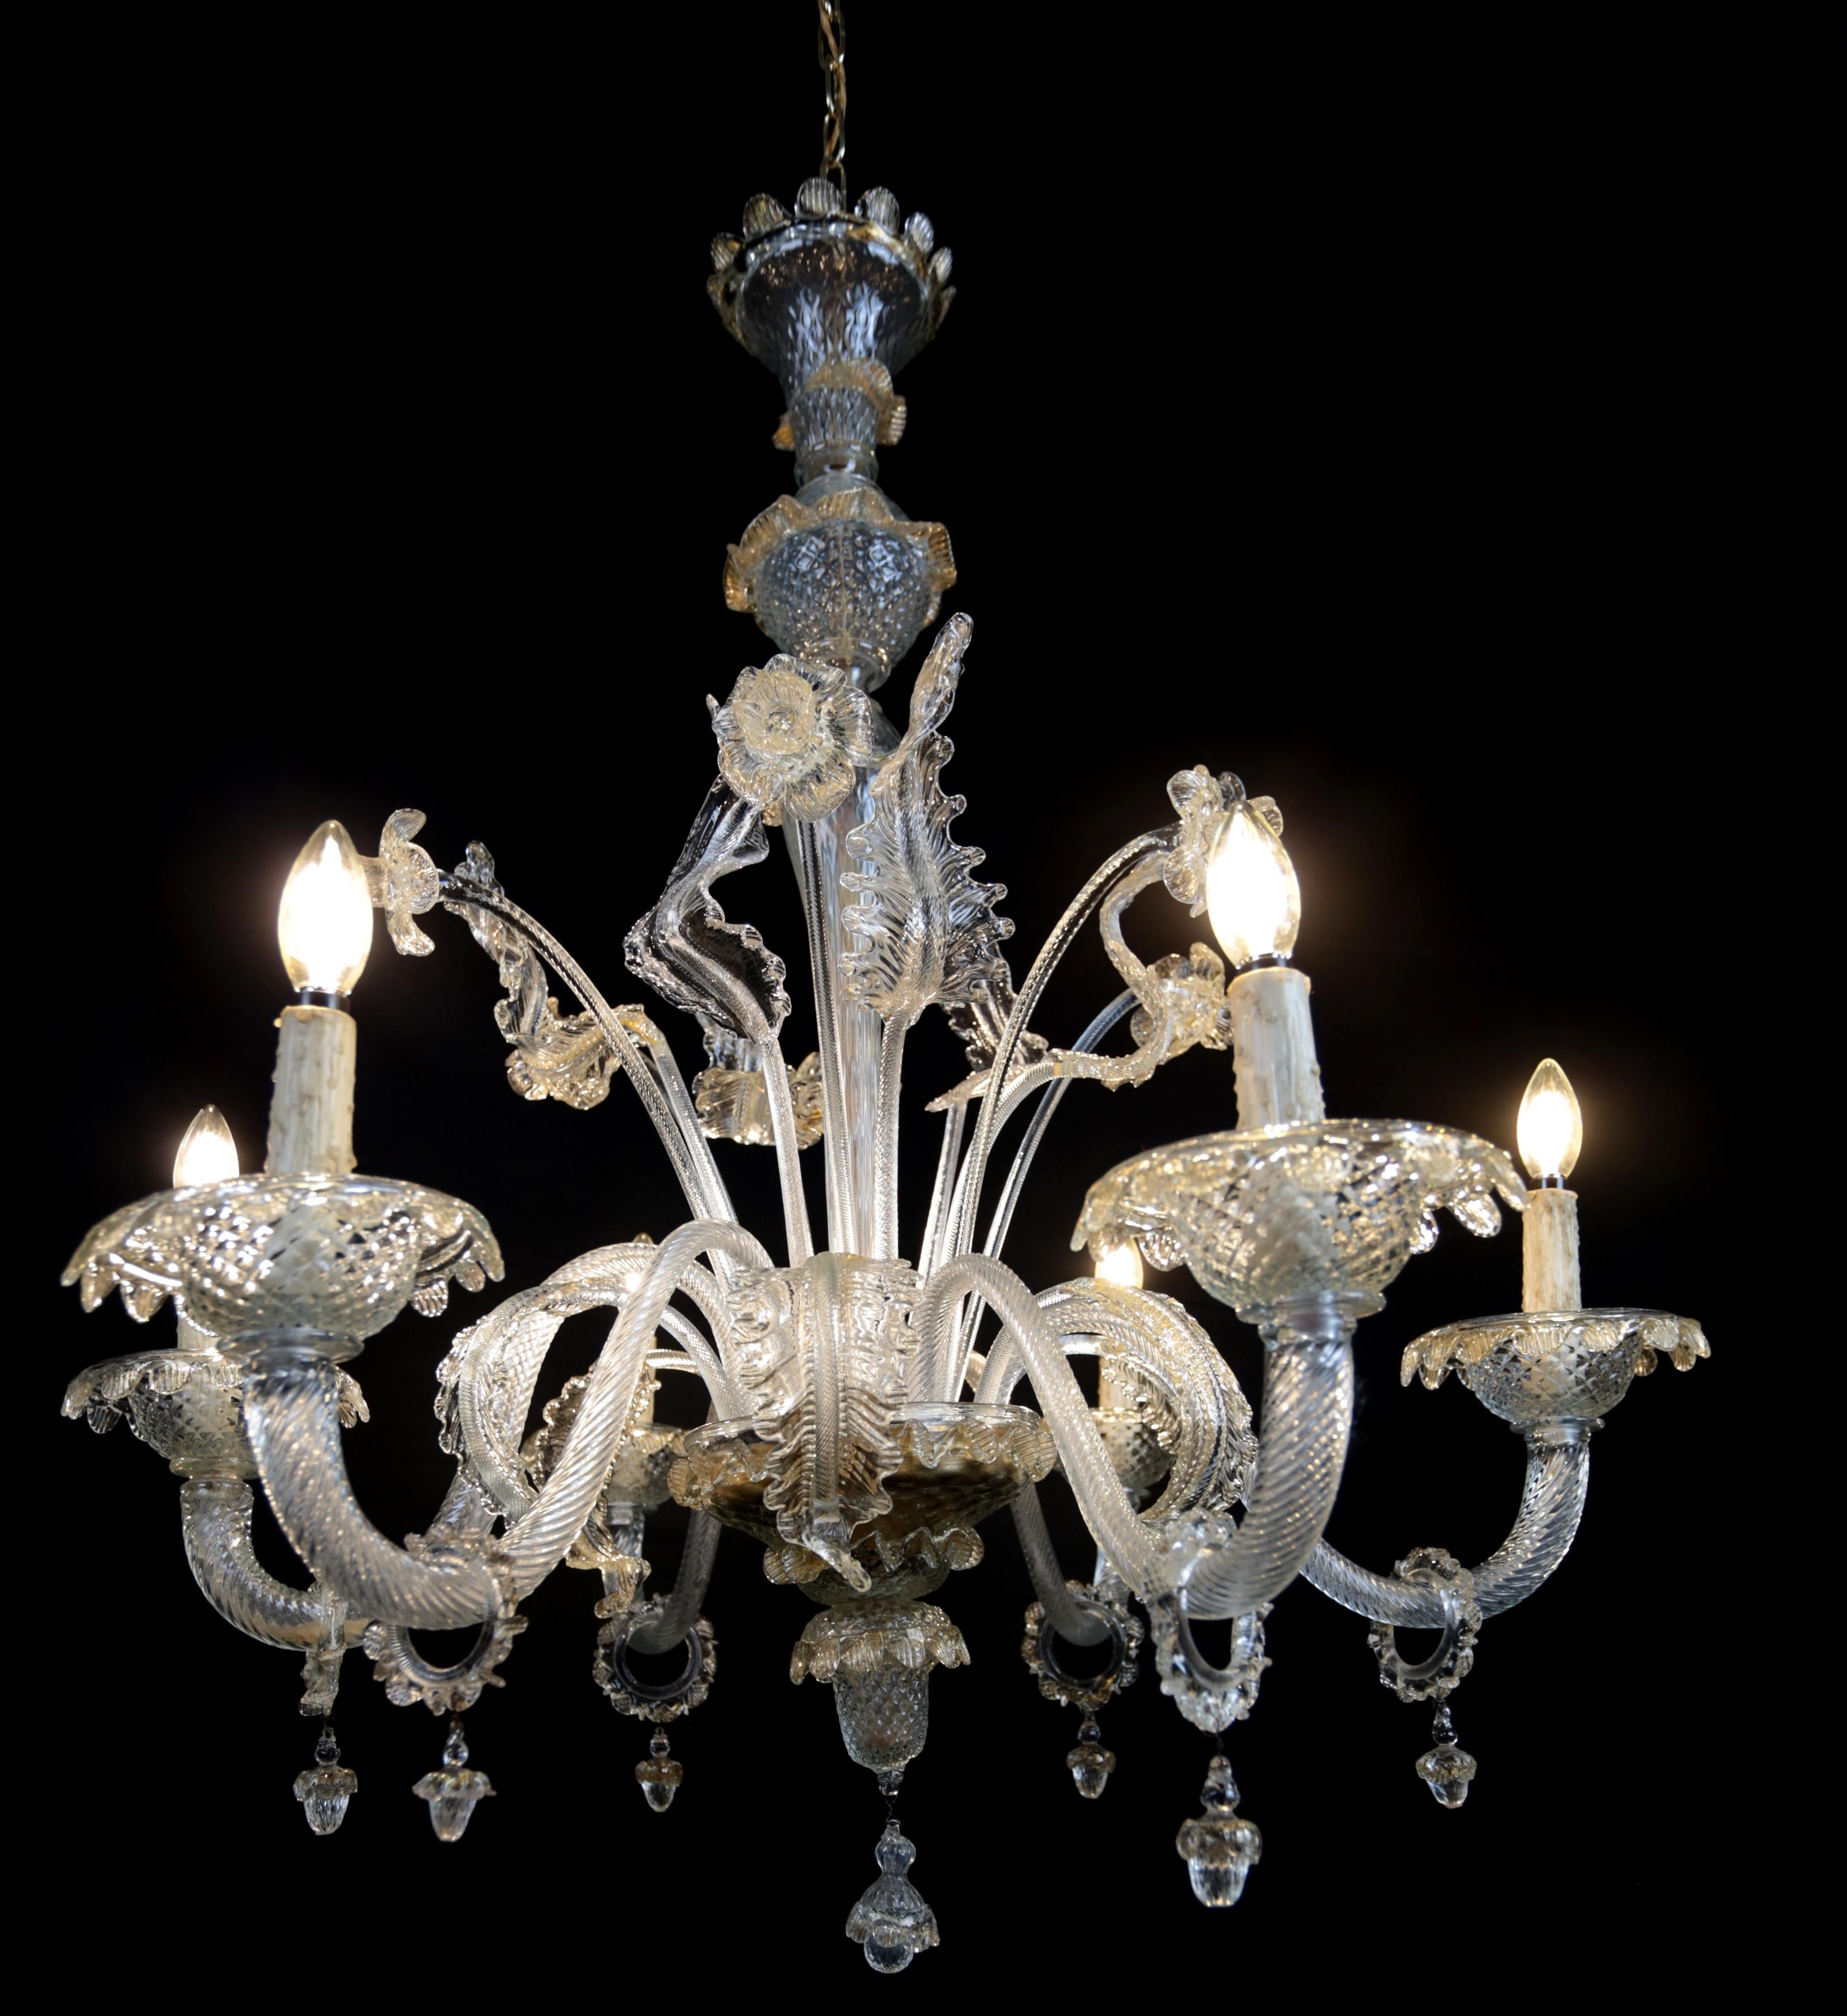 Six-arm Venetian Murano chandelier. Restored

Beautiful Venetian Murano chandelier with floral decoration. Detailed leaves and flowers. The chandelier has new wiring and a new power cable. Very good condition with no broken pieces. The chandelier is